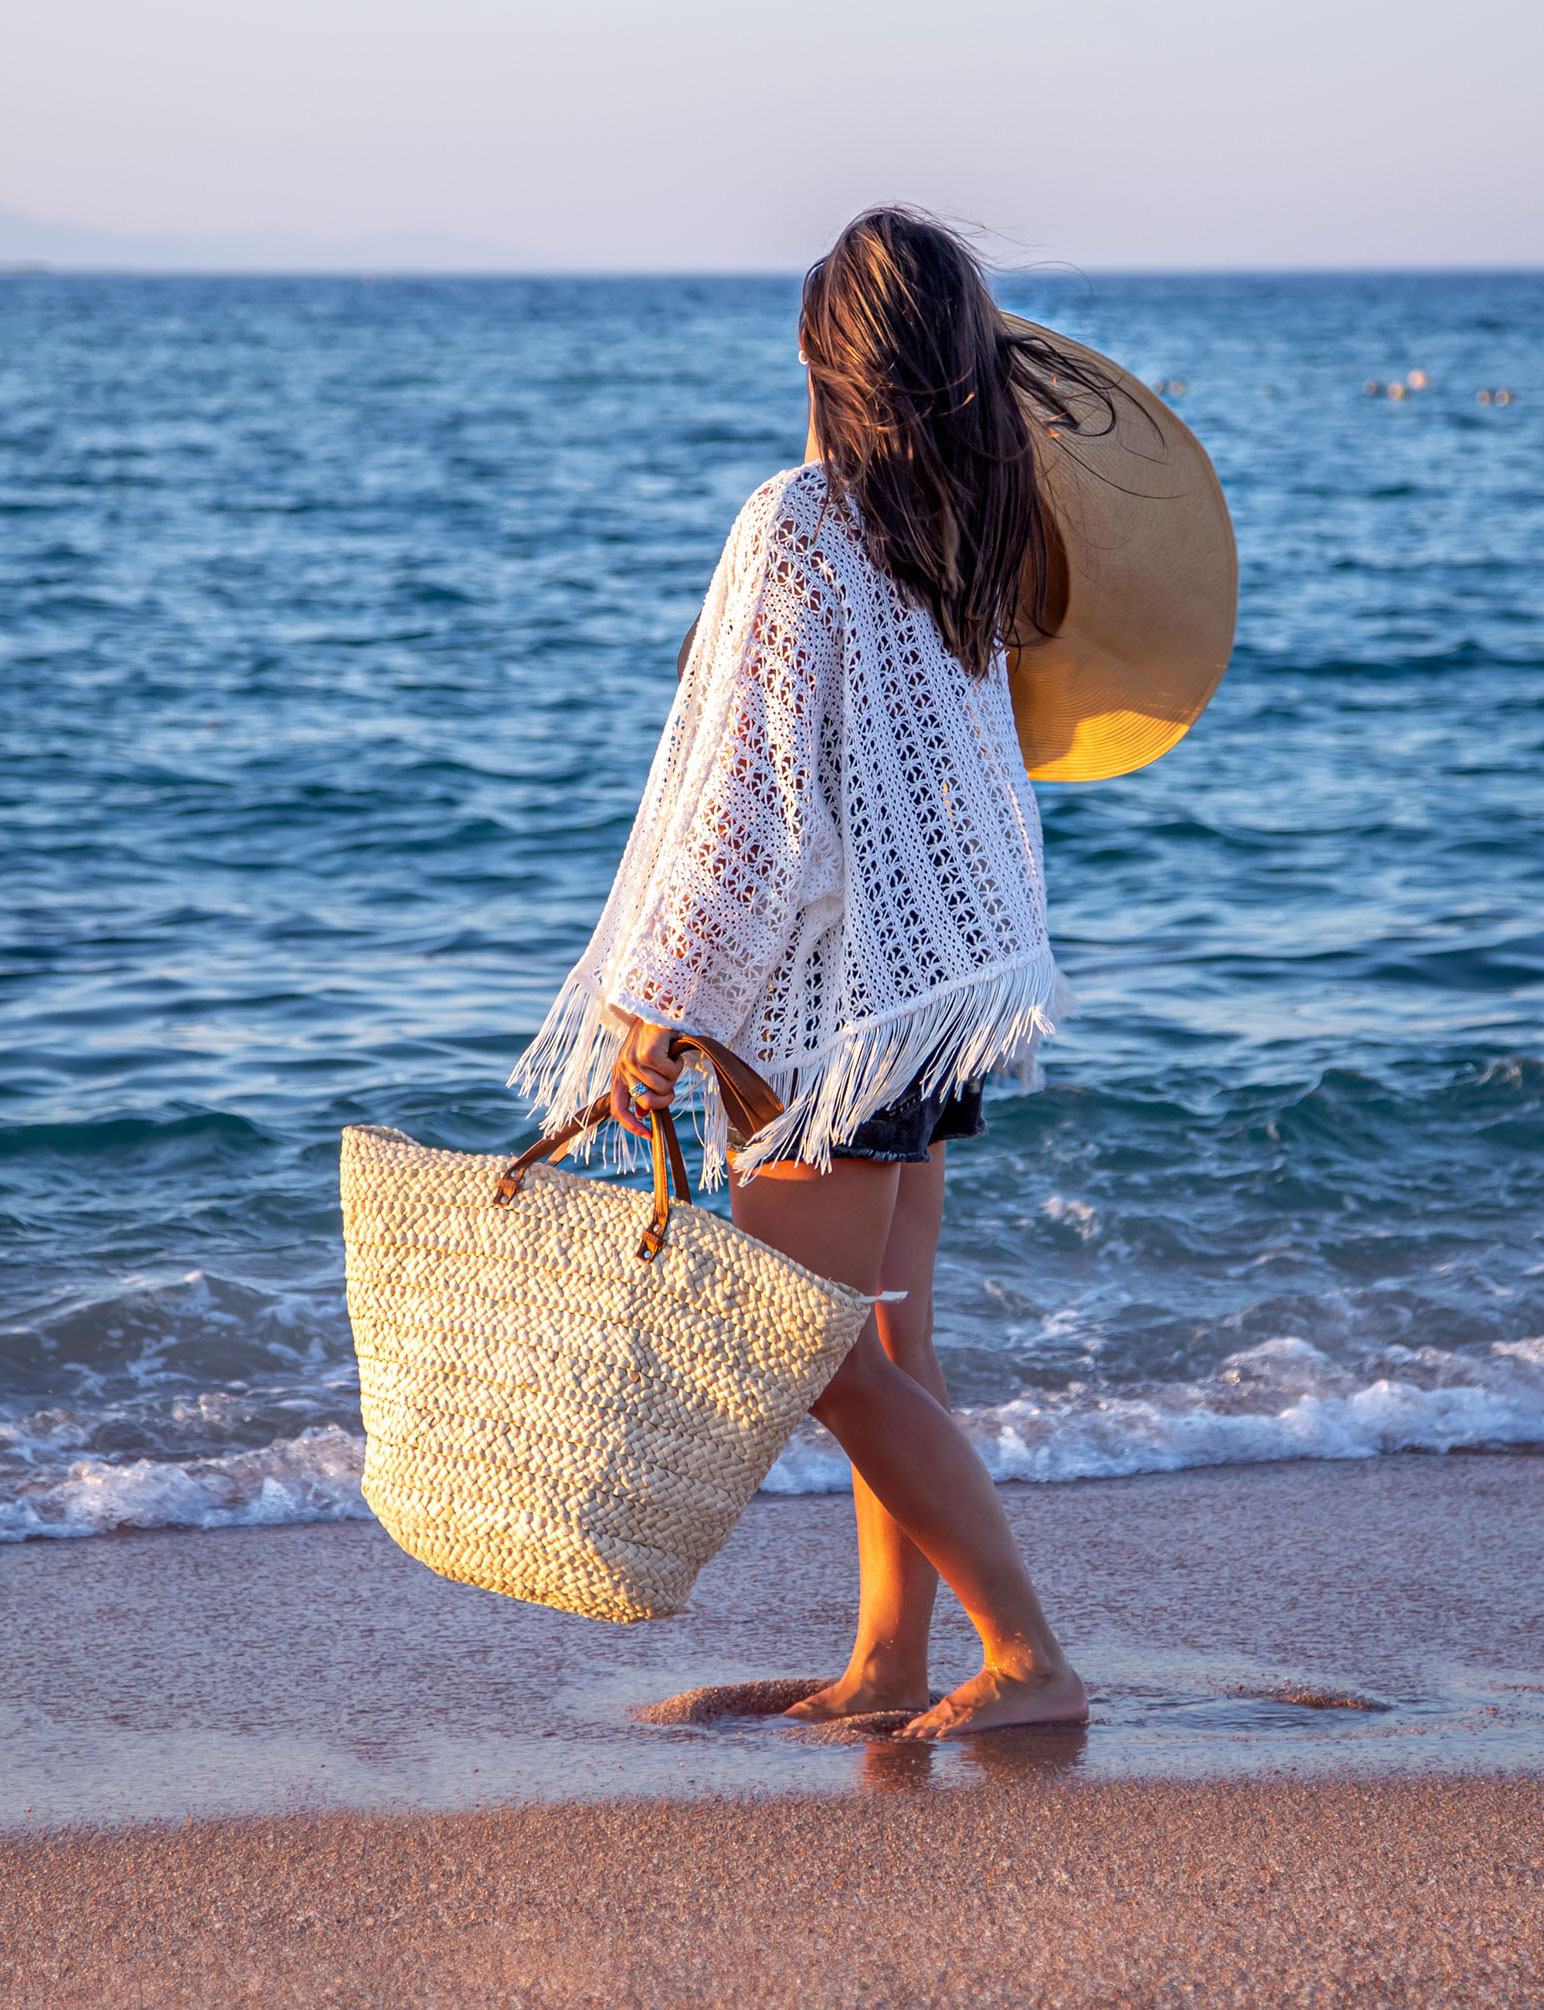 girl-with-hat-in-her-hands-and-wicker-bag-walks-on-the-seashore-summer-vacation-concept